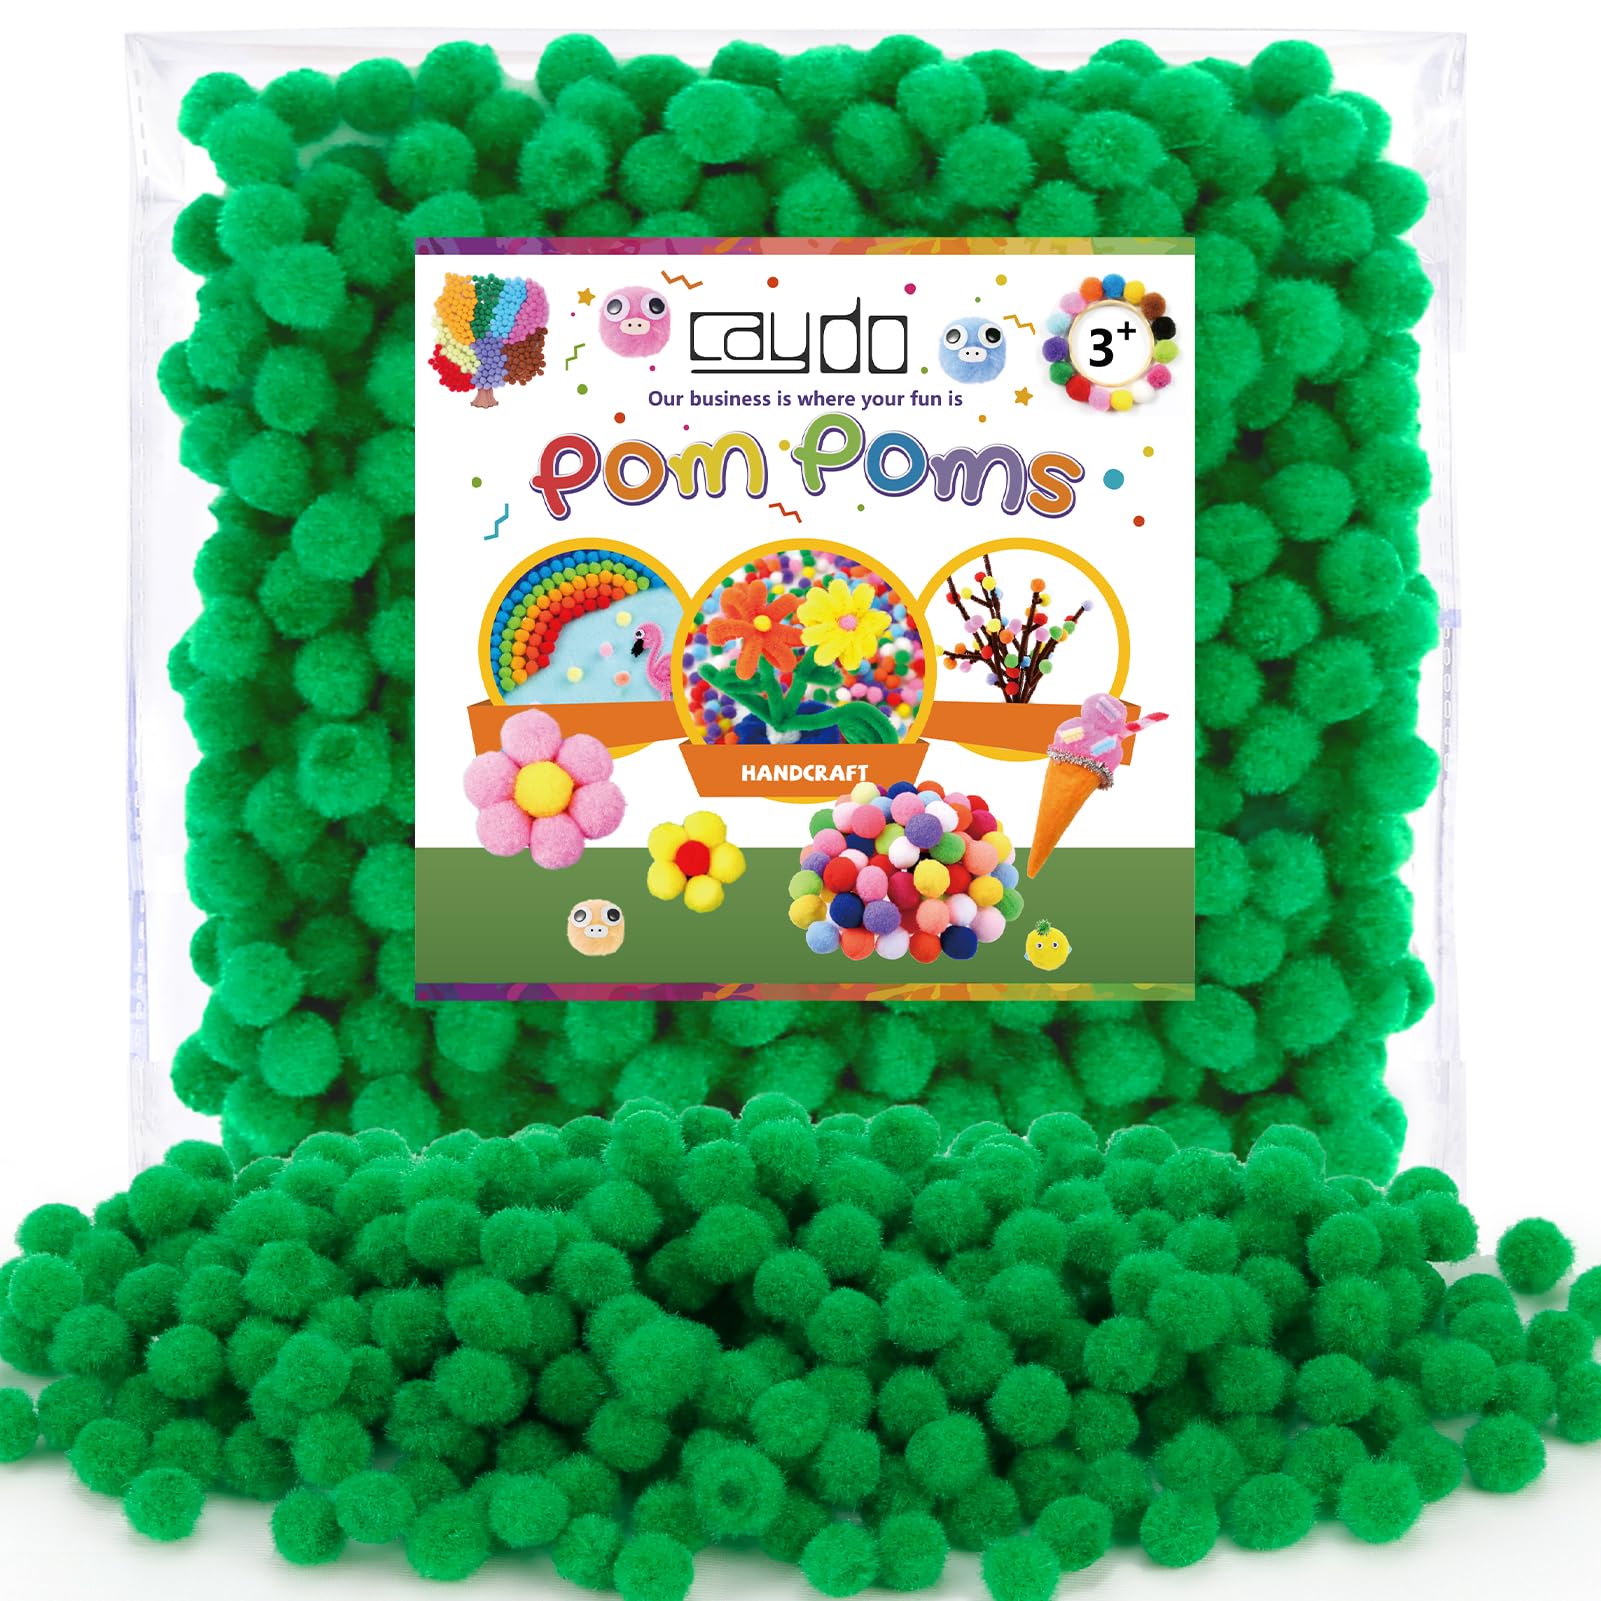  2500 Pieces Pompoms For Crafts,Small Size 1CM Small Pom Poms  For Crafts,Pompoms For DIY Creative Crafts Decorations